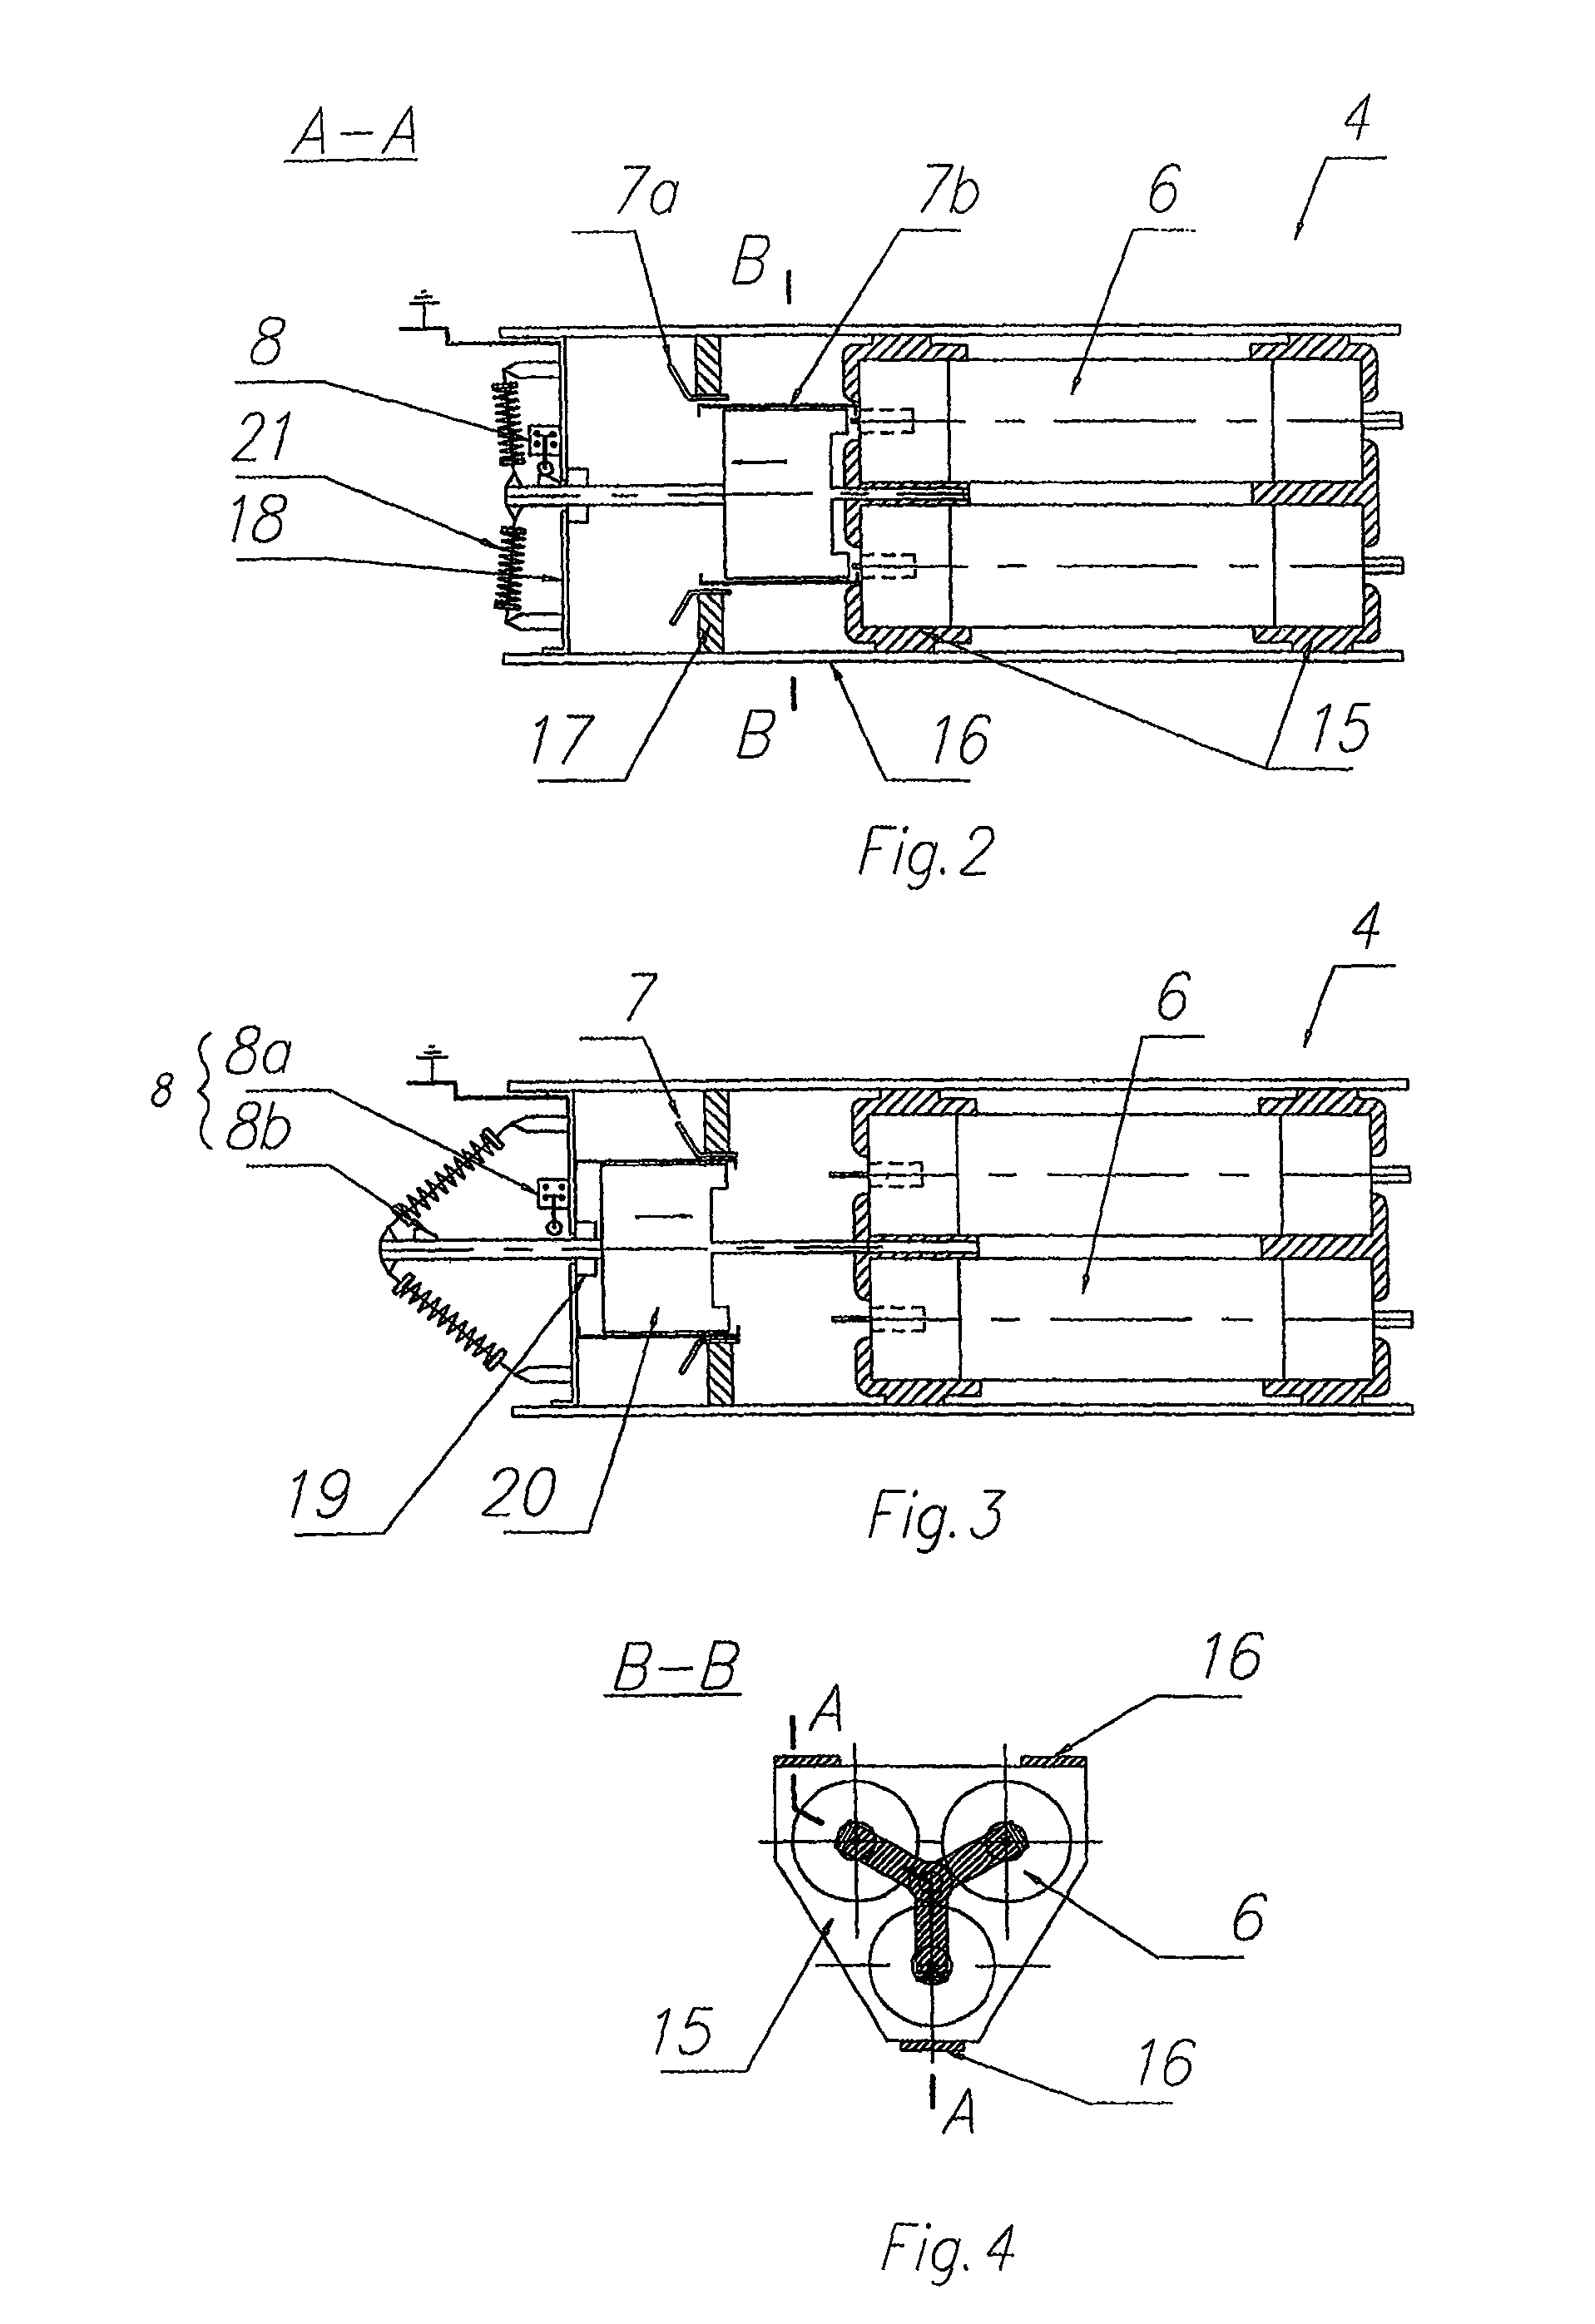 Disconnector for distribution transformers with dielectric liquid